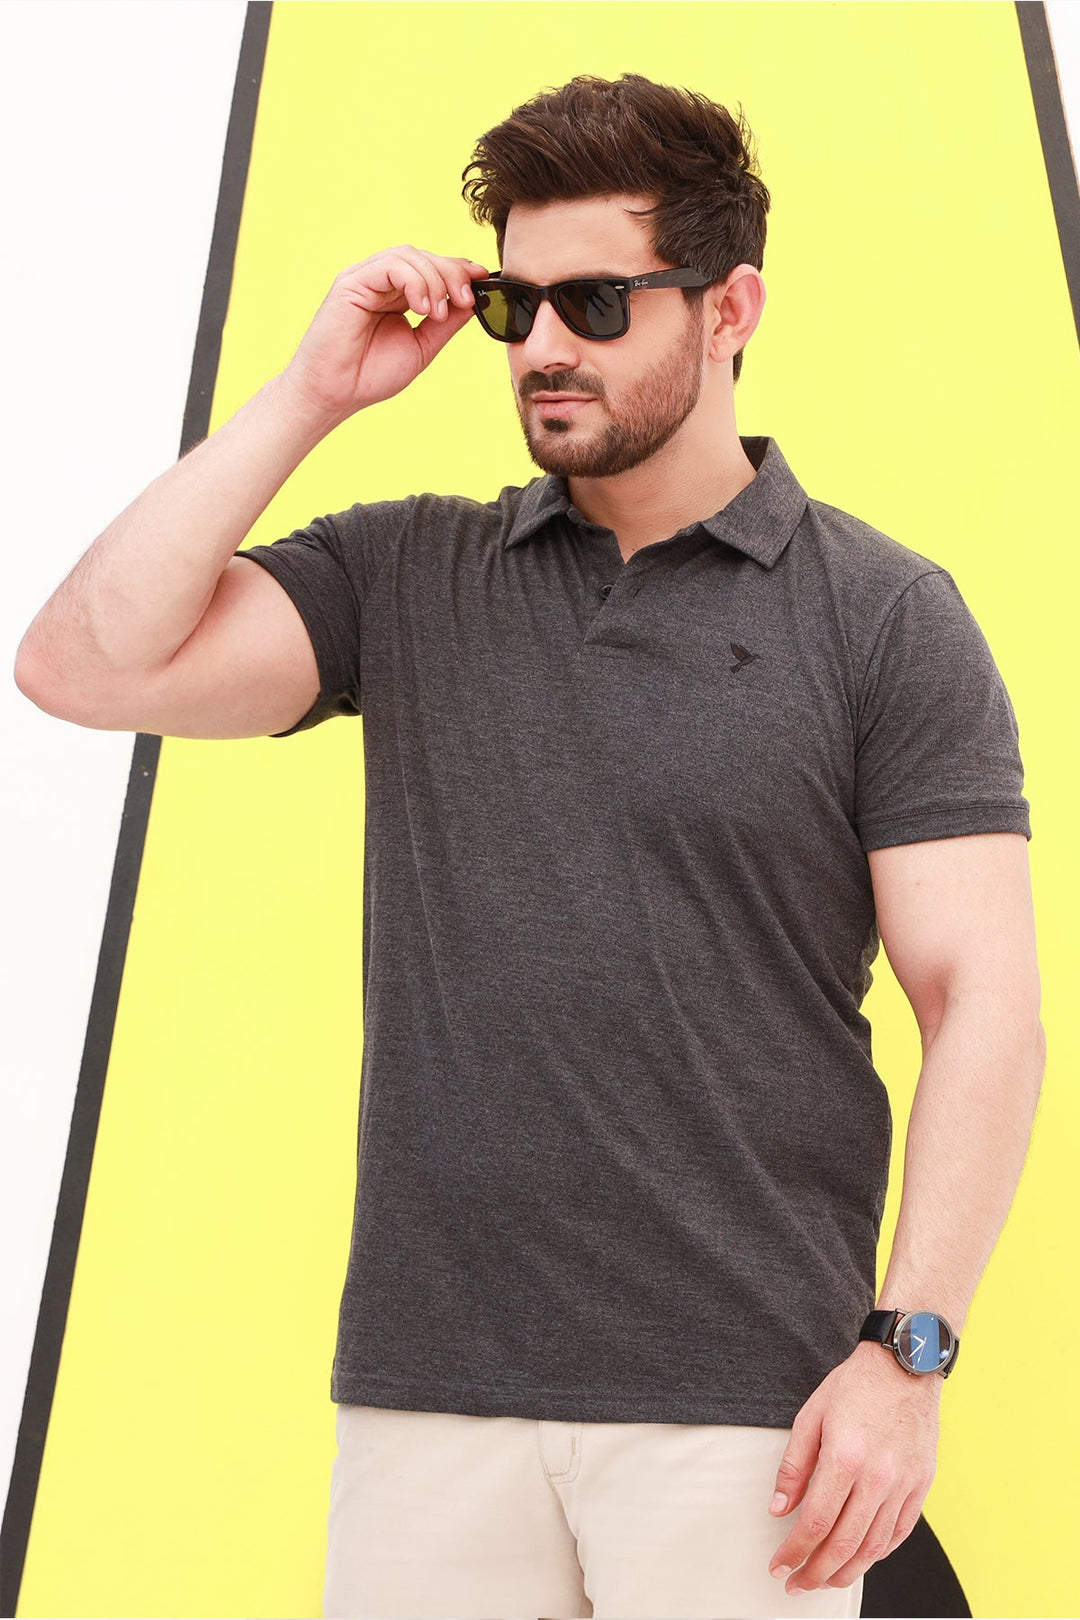 Mens Embroidered Polo Shirt Online Pakistan